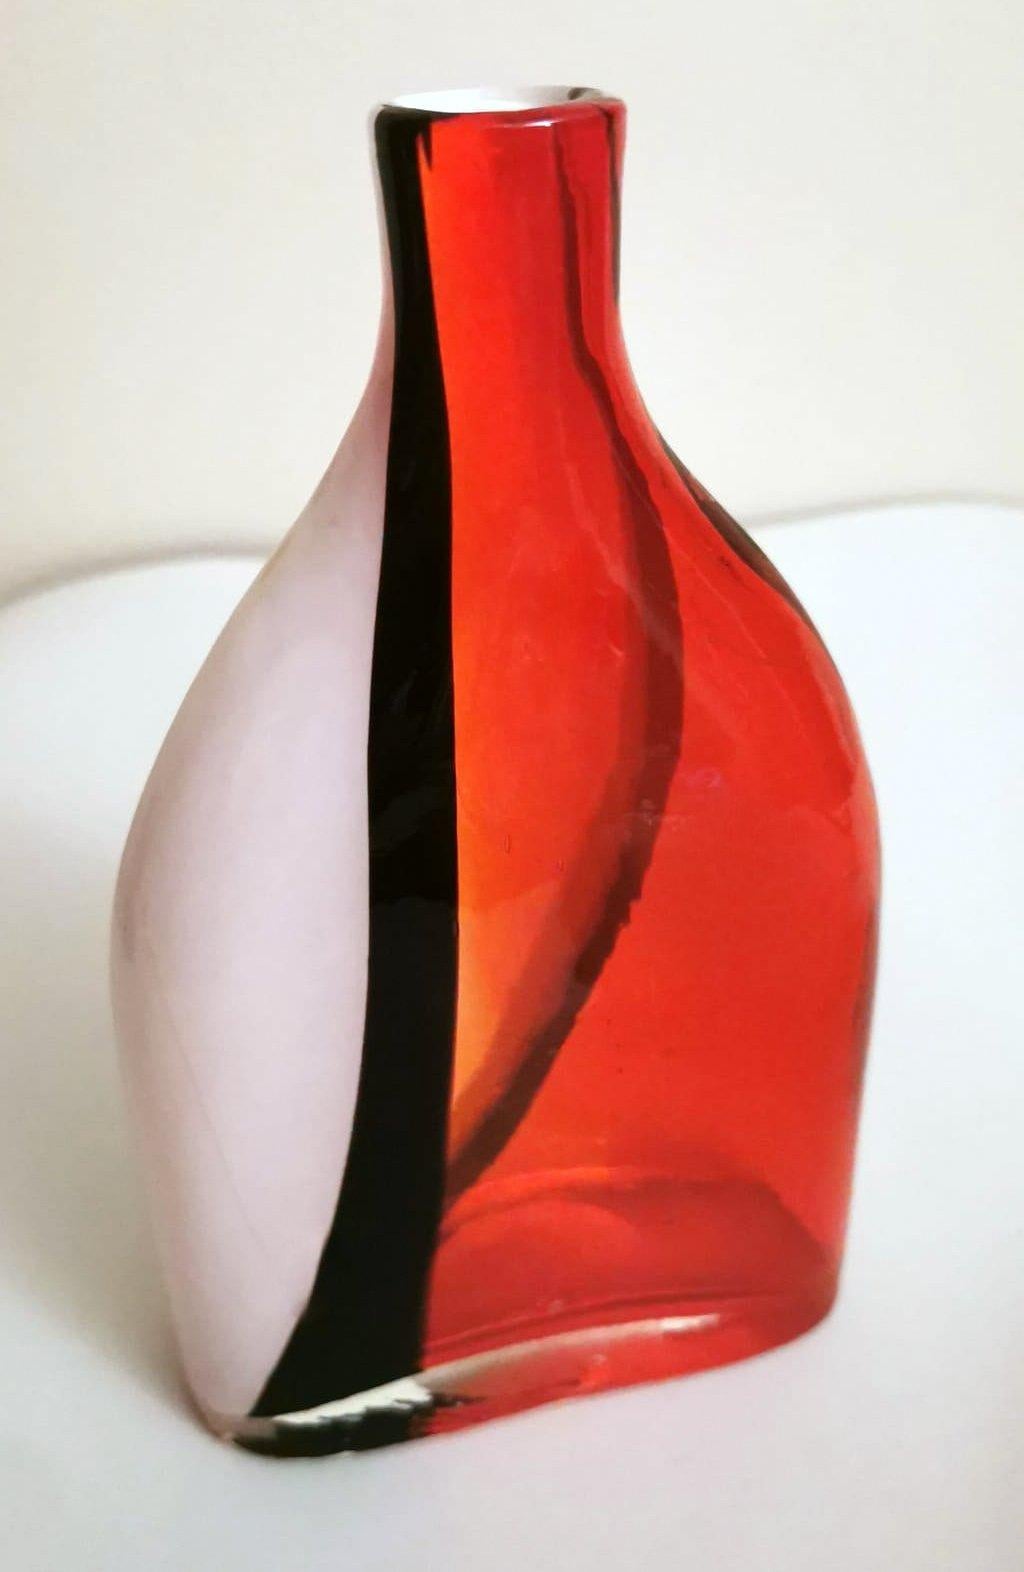 Cenedese Style Pair of Vintage Murano “Vetro Sommerso” Vases In Good Condition For Sale In Prato, Tuscany